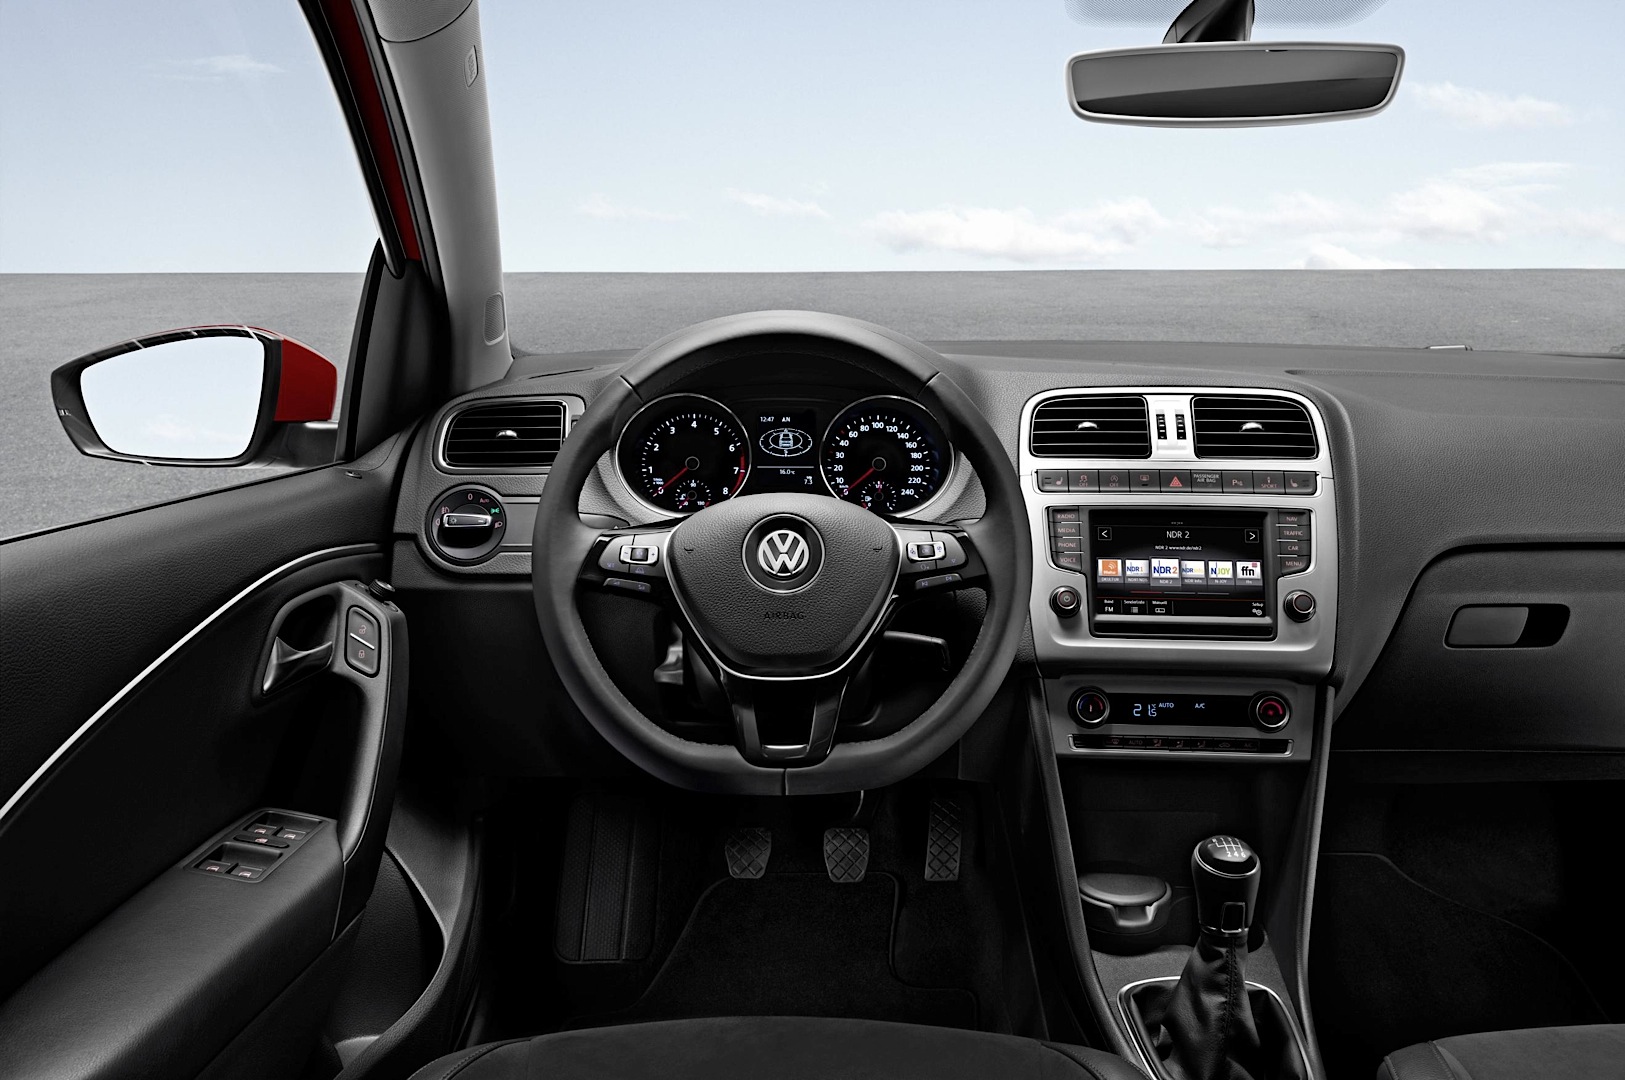 2014 Volkswagen Polo Facelift Interior And Updated Tech